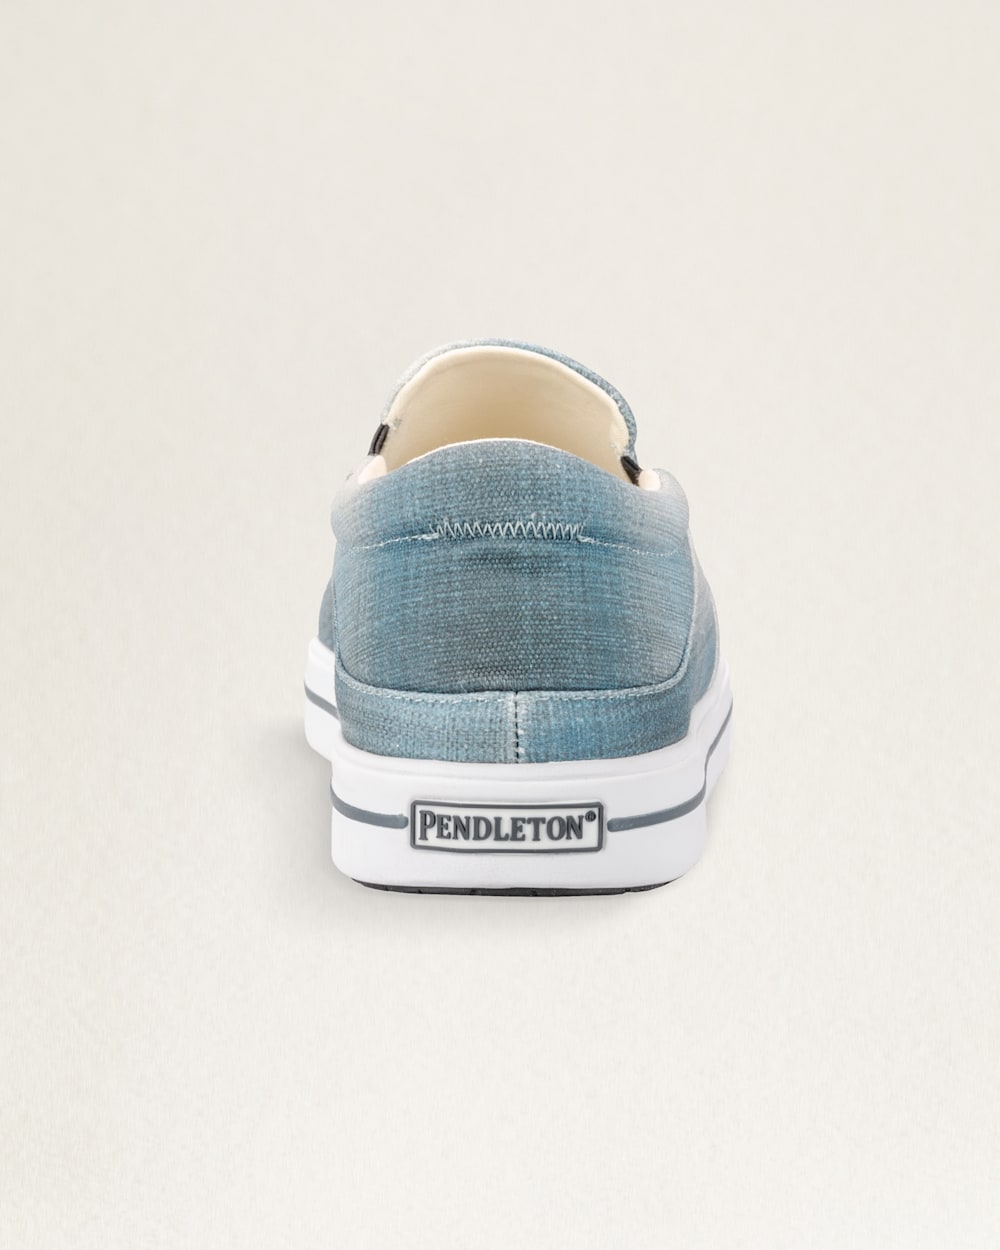 ALTERNATE VIEW OF MEN'S ROUND TOE SLIP-ON SHOES IN TURQUOISE OMBRE image number 2